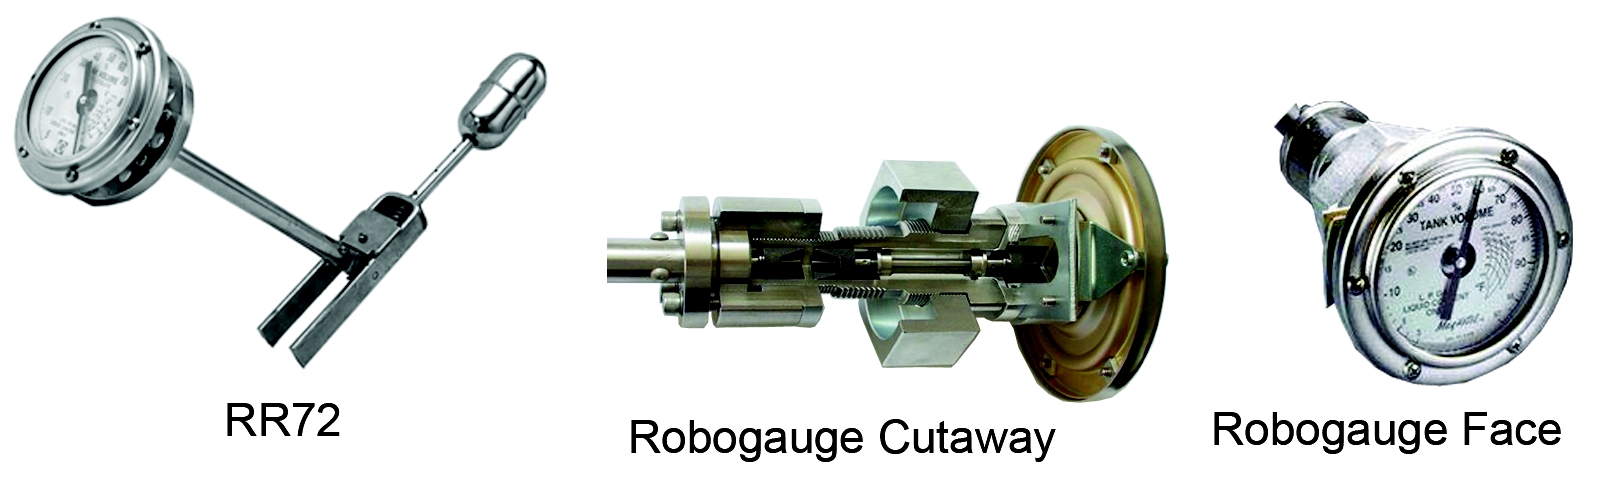 84" Robogauge, for 1" Opening